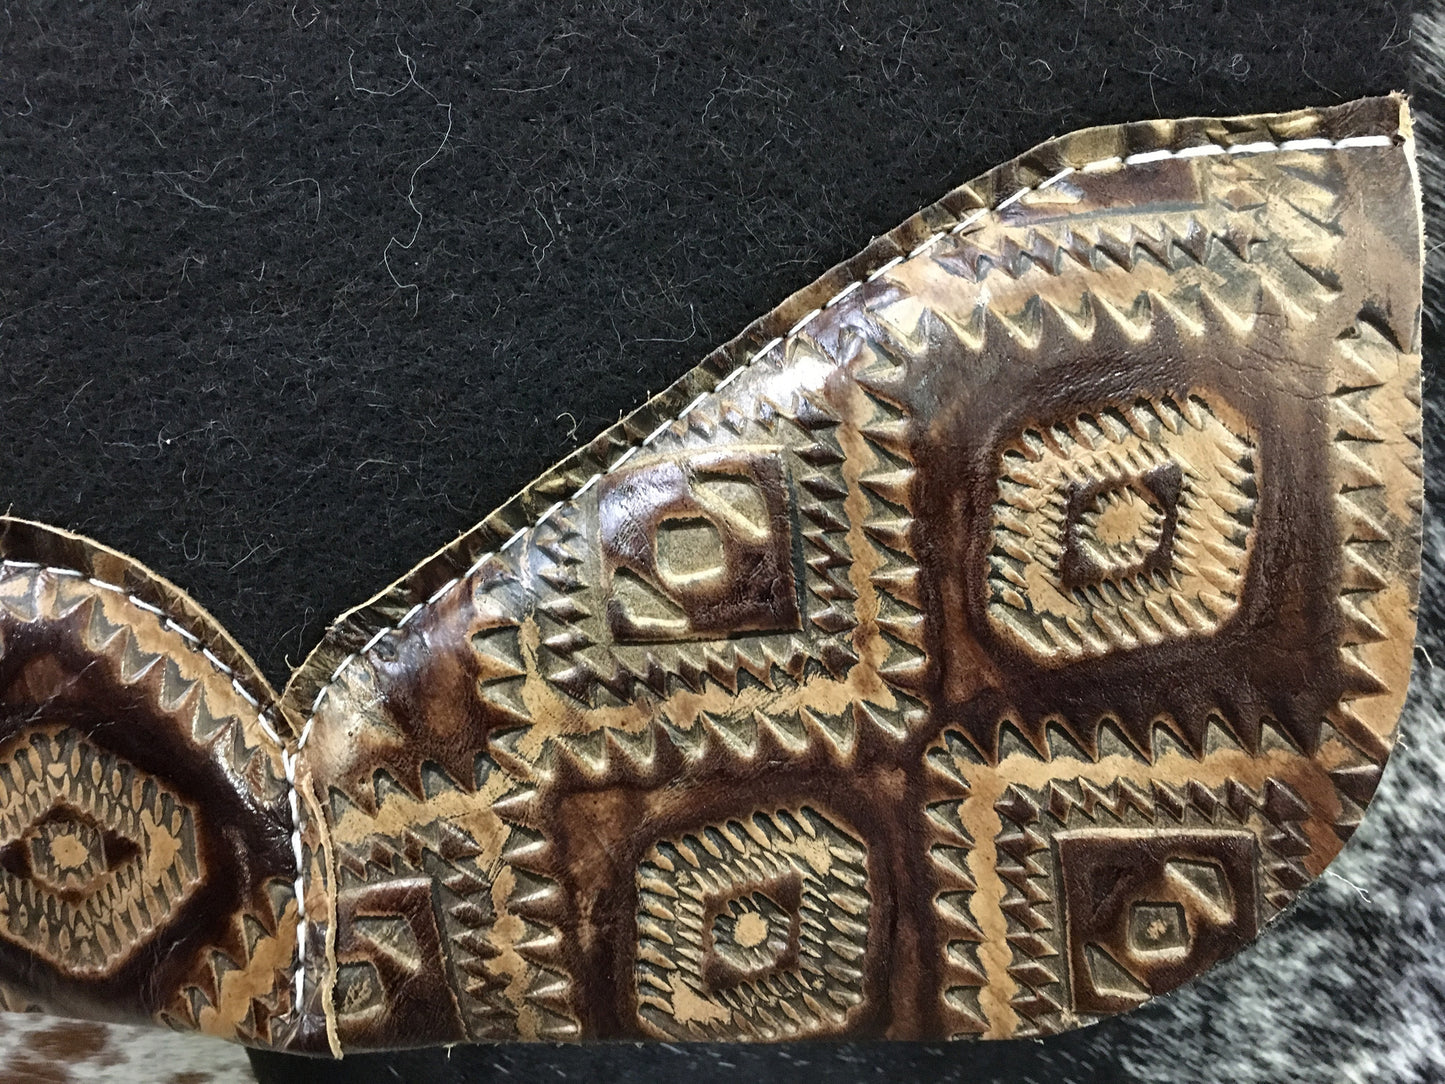 Best ever Saddle pad with brown/tan Aztec wear leathers